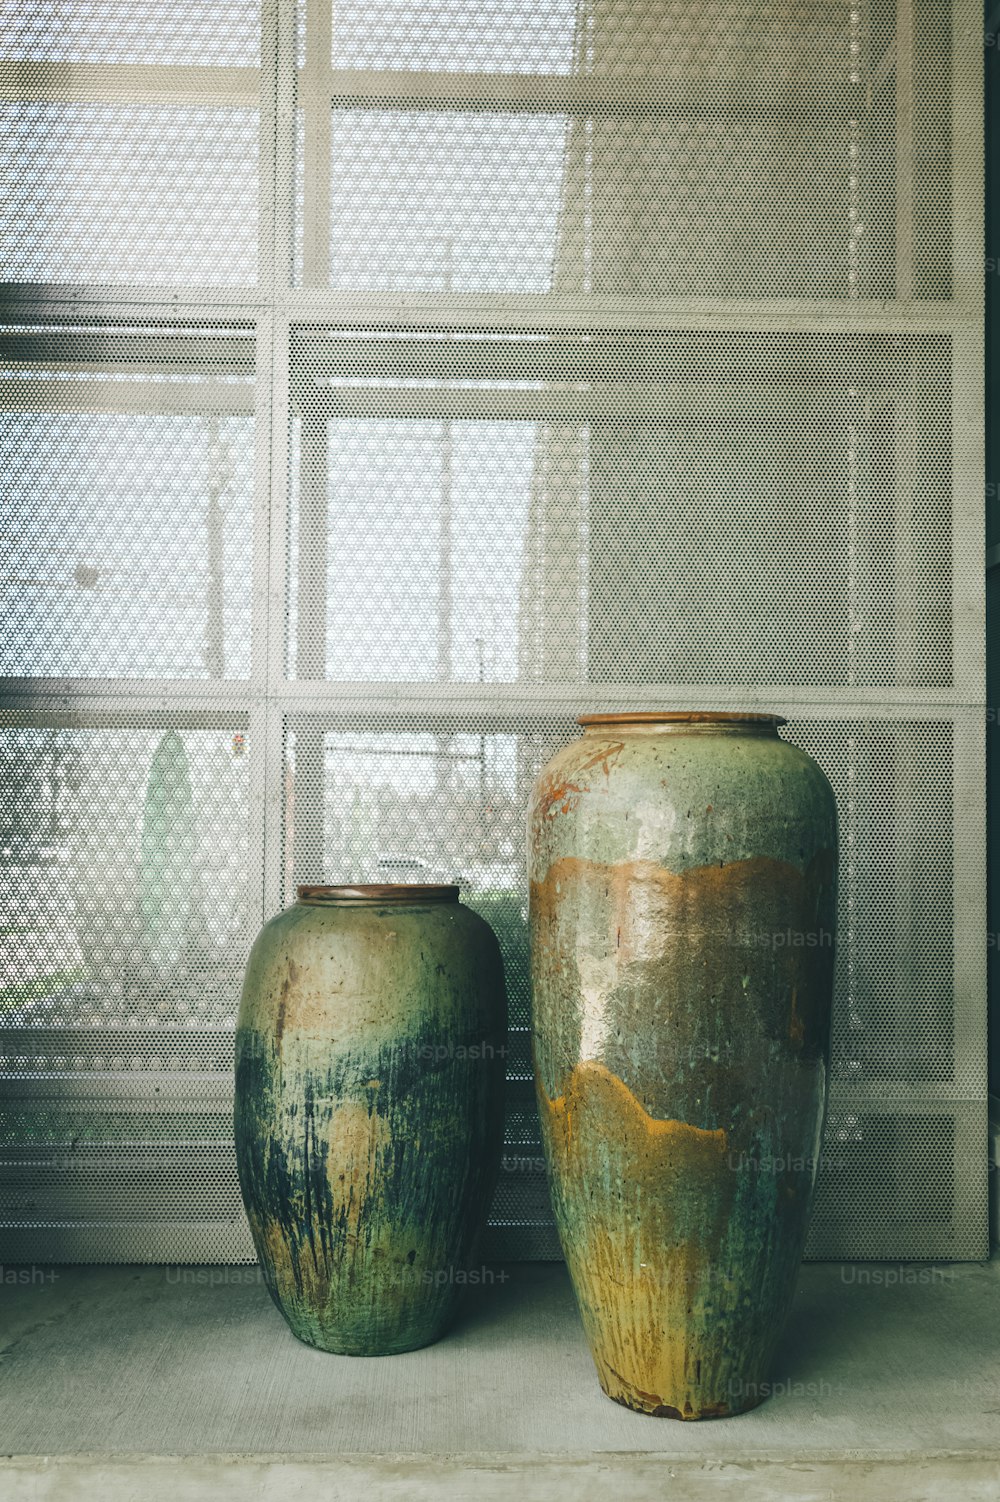 two green vases sitting next to each other in front of a window